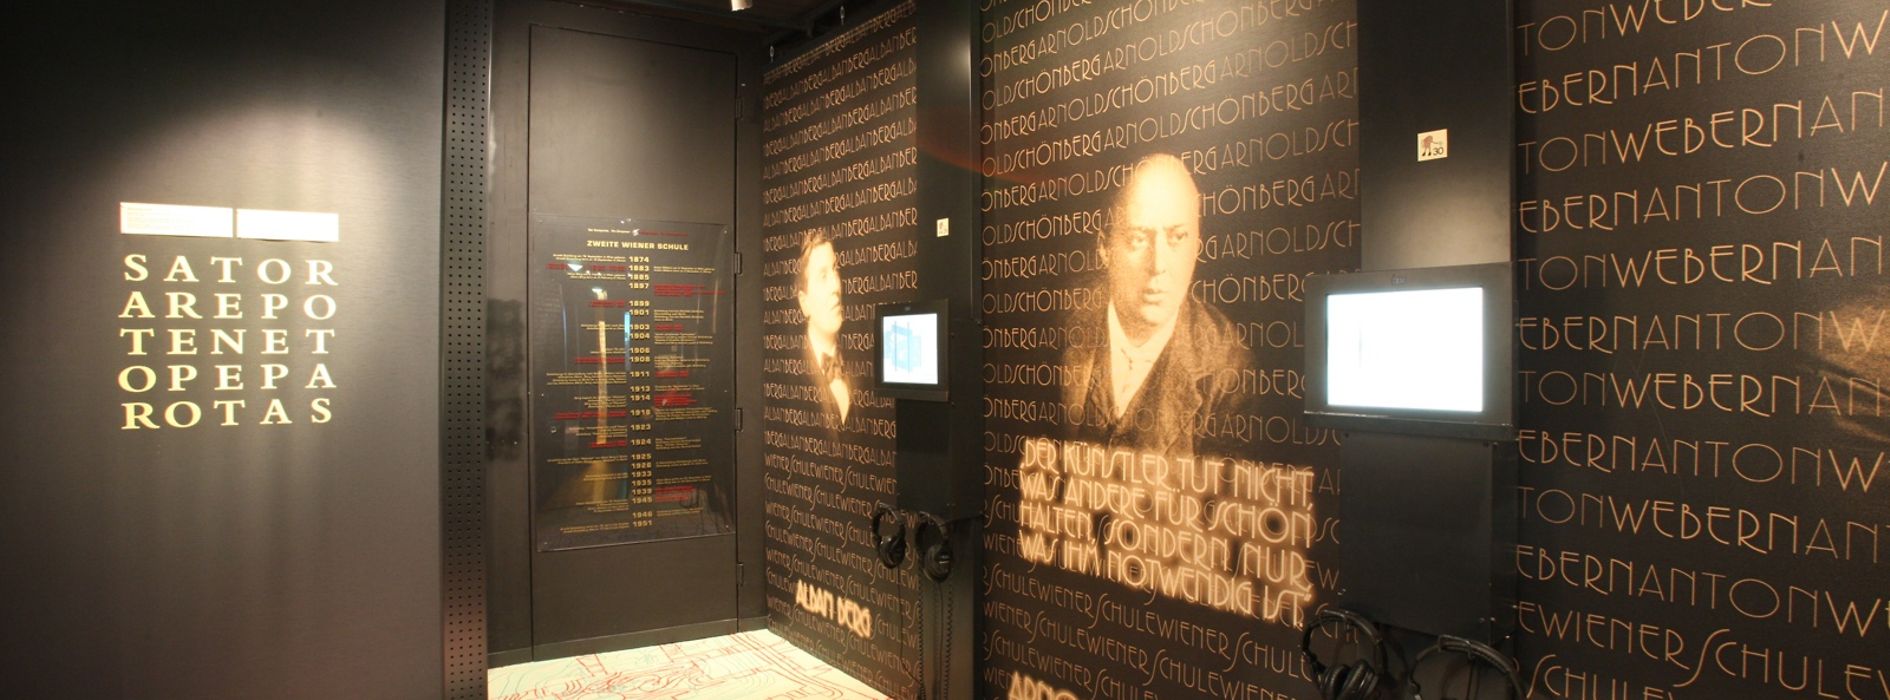 Exhibition room at the House of Music dedicated to Arnold Schönberg